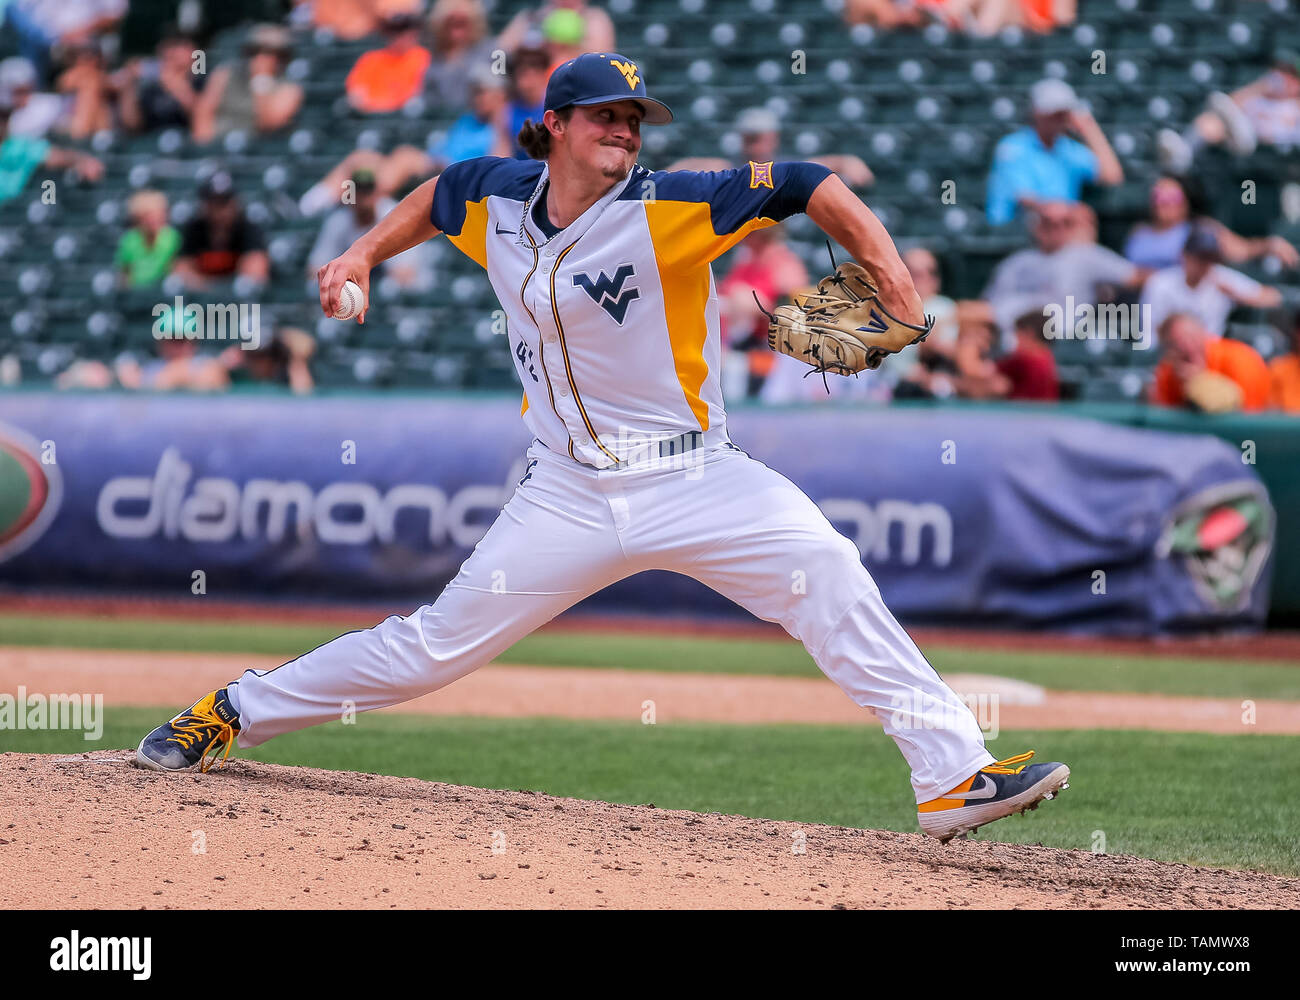 Oklahoma City, OK, USA. 25th May, 2019. West Virginia pitcher Sam Kessler (42) delivers a pitch during the 2019 Phillips 66 Big 12 Baseball Championship game between the West Virginia Mountaineers and the Oklahoma State Cowboys at Chickasaw Bricktown Ballpark in Oklahoma City, OK. Gray Siegel/CSM/Alamy Live News Stock Photo